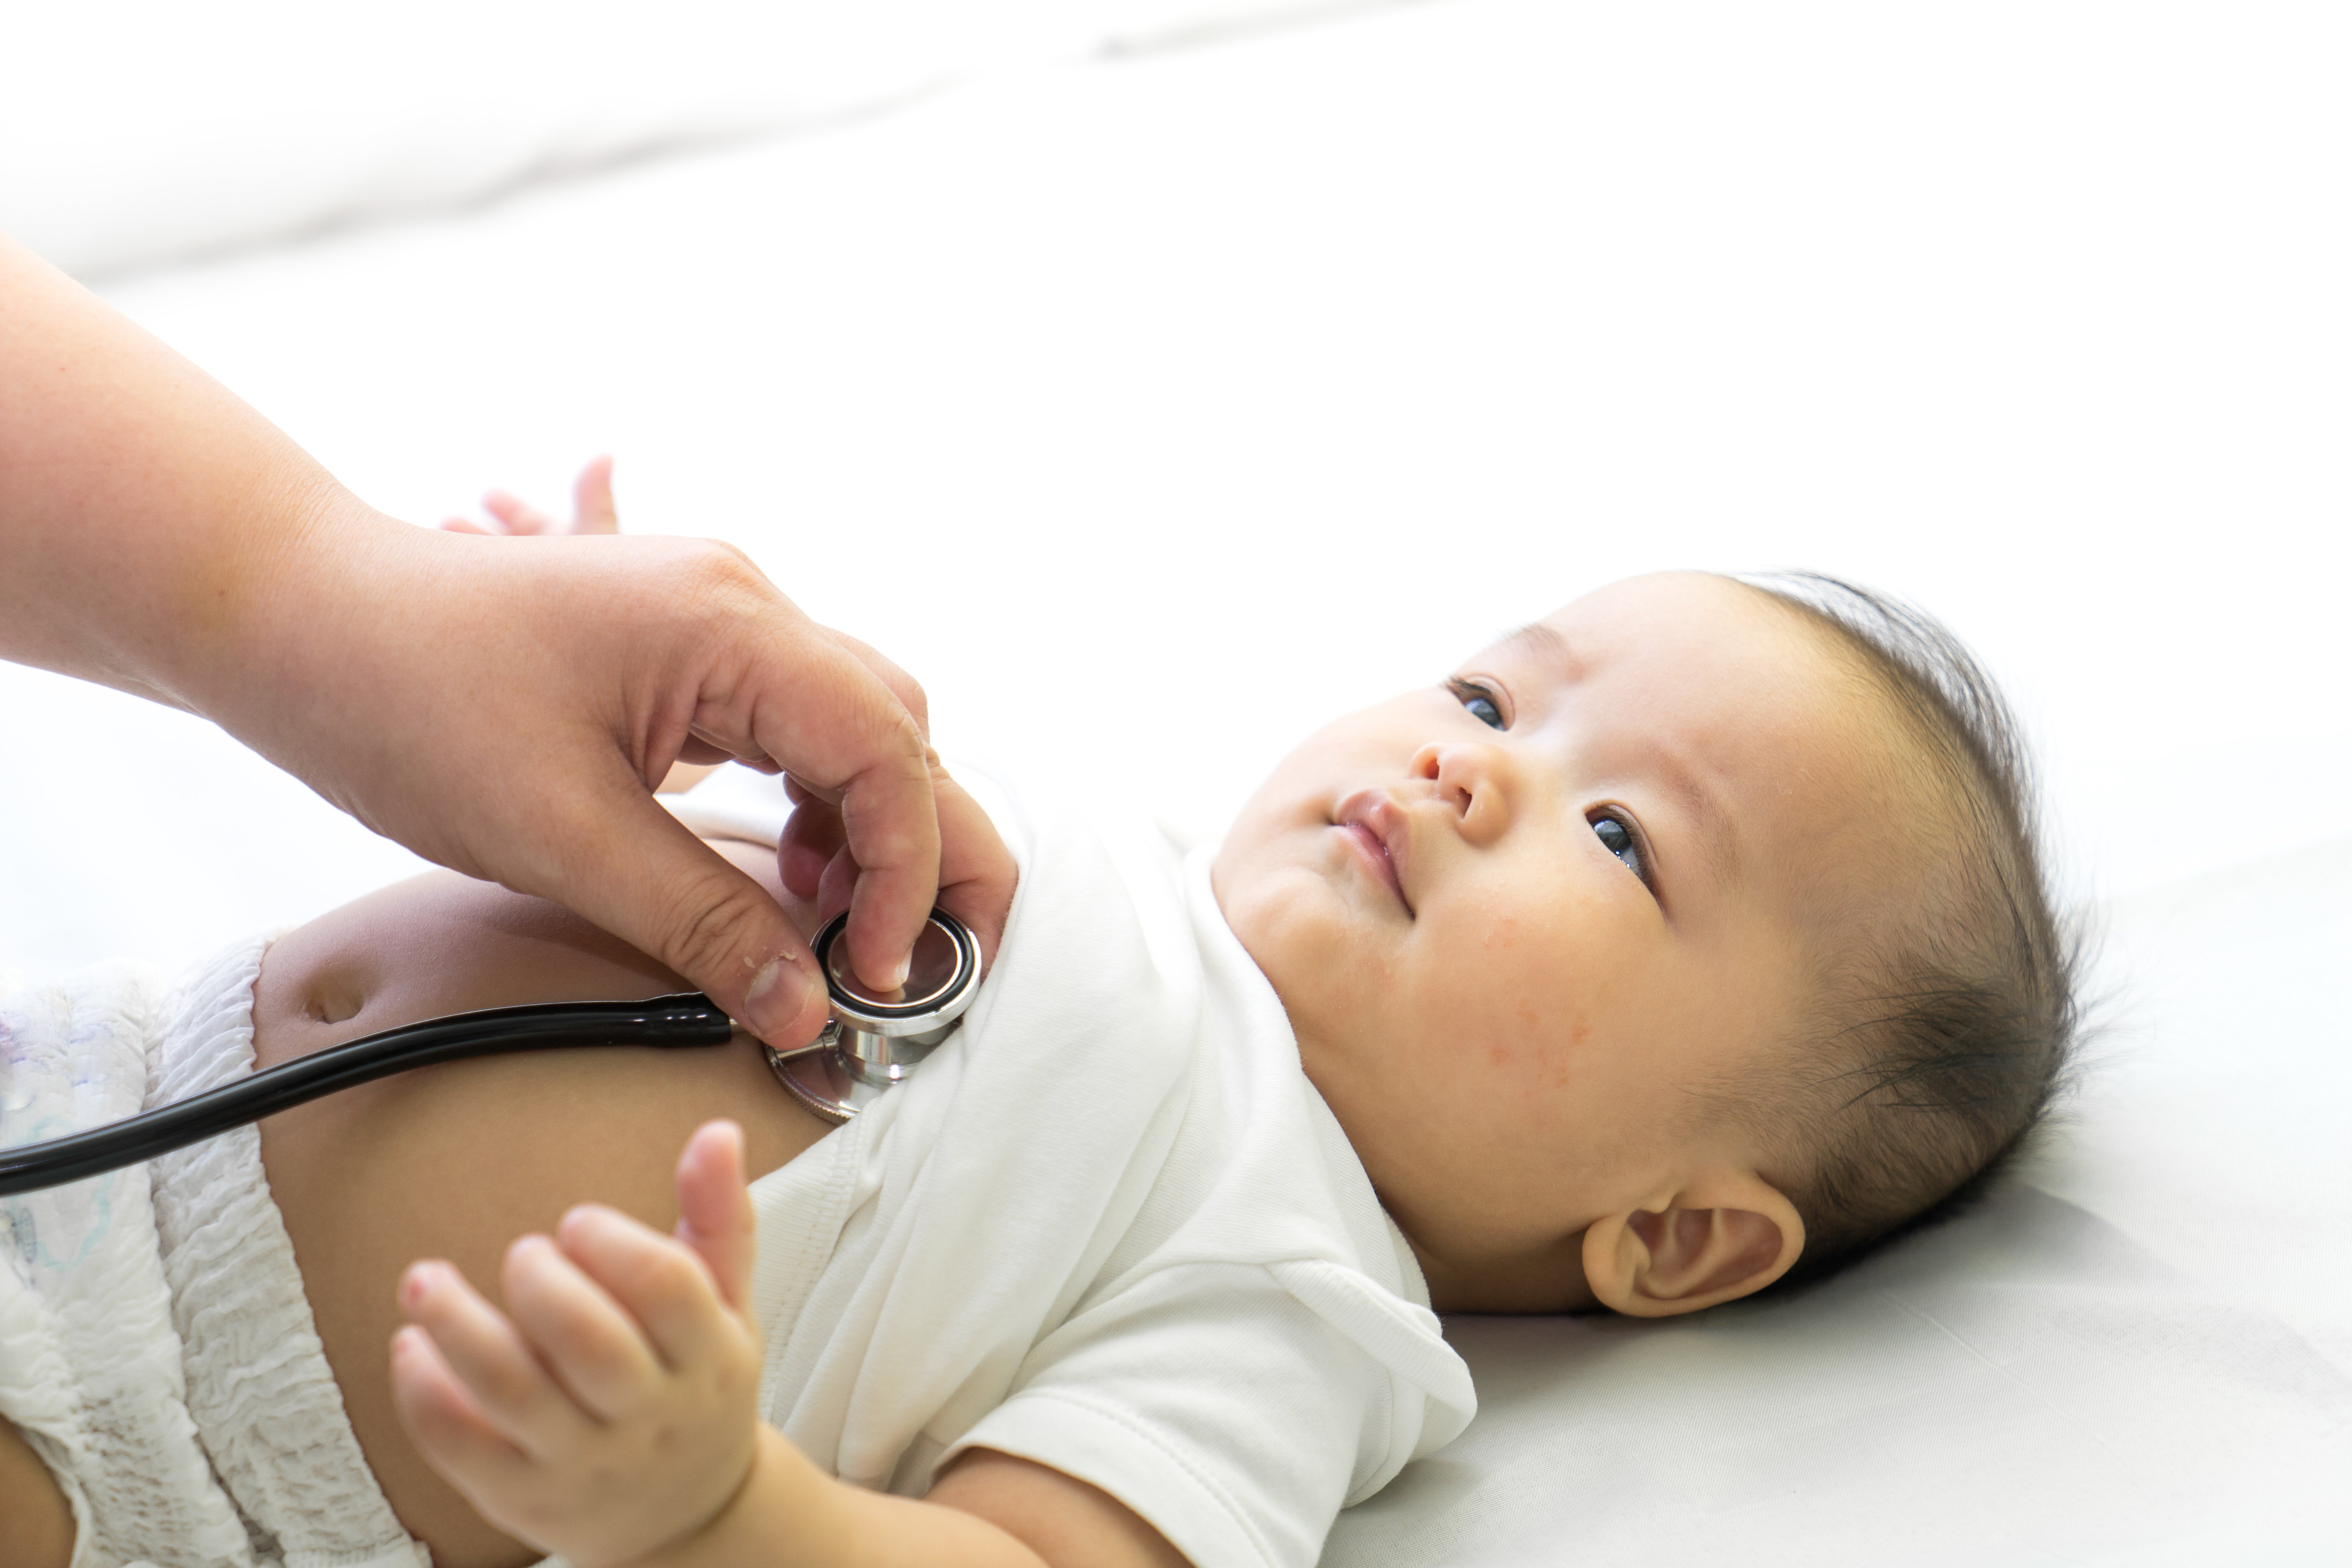 Doctor exams Asian newborn baby with stethoscope. | Photo: Shutterstock